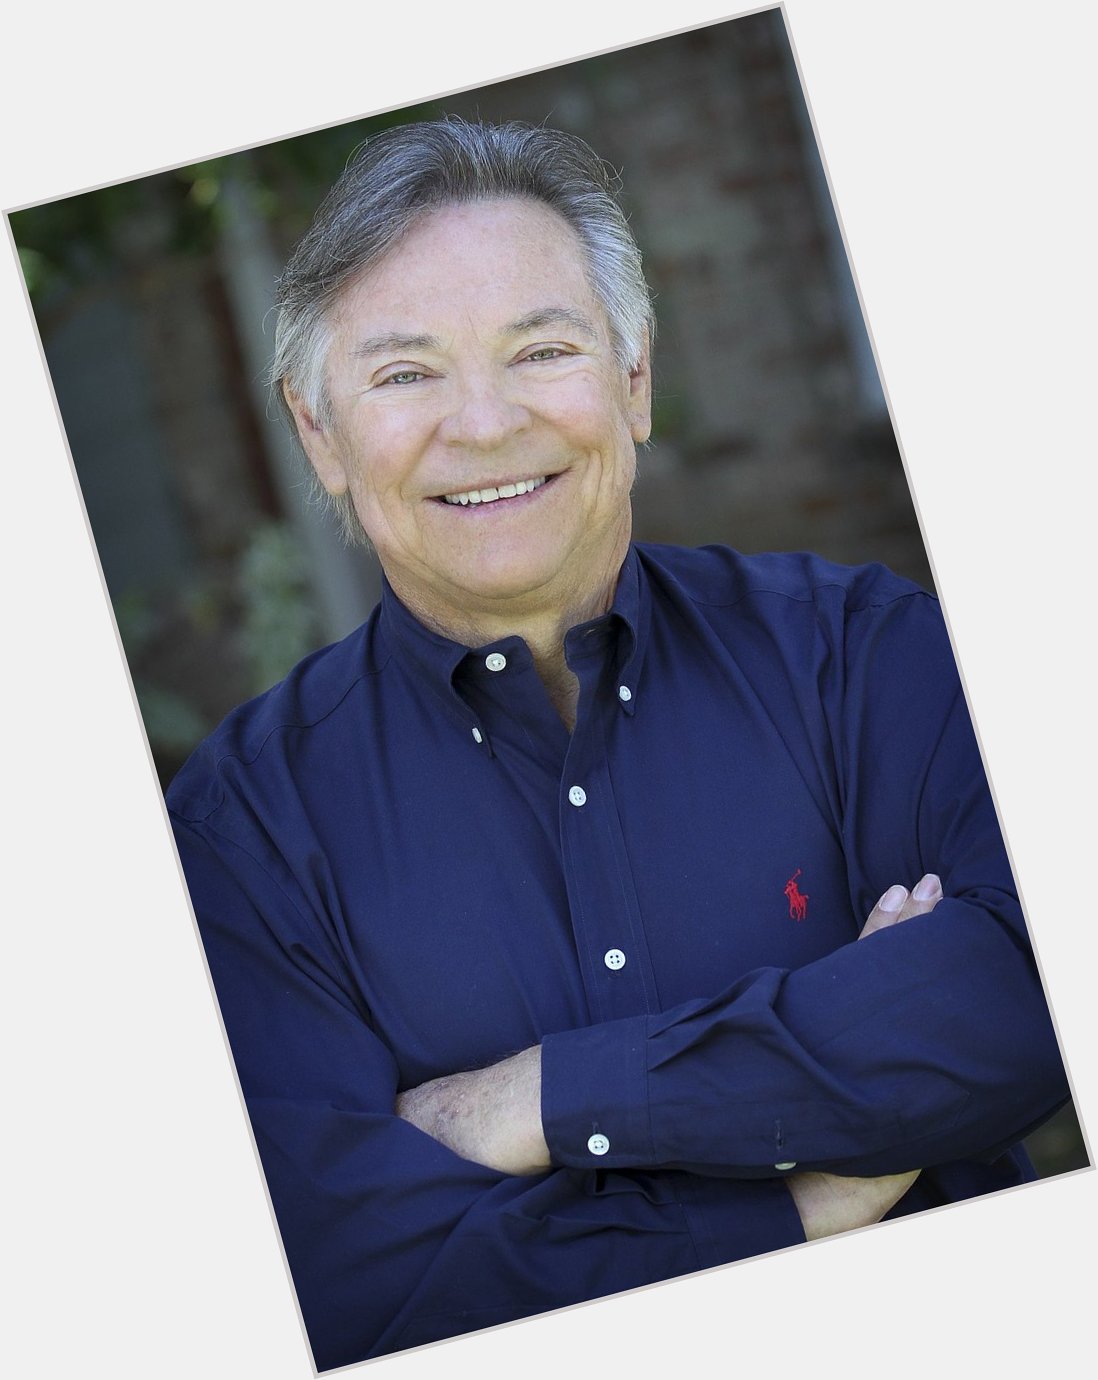 Wishing a very happy birthday to our favorite studio guard/hippo/dog/chicken of a thousand voices: Frank Welker! 